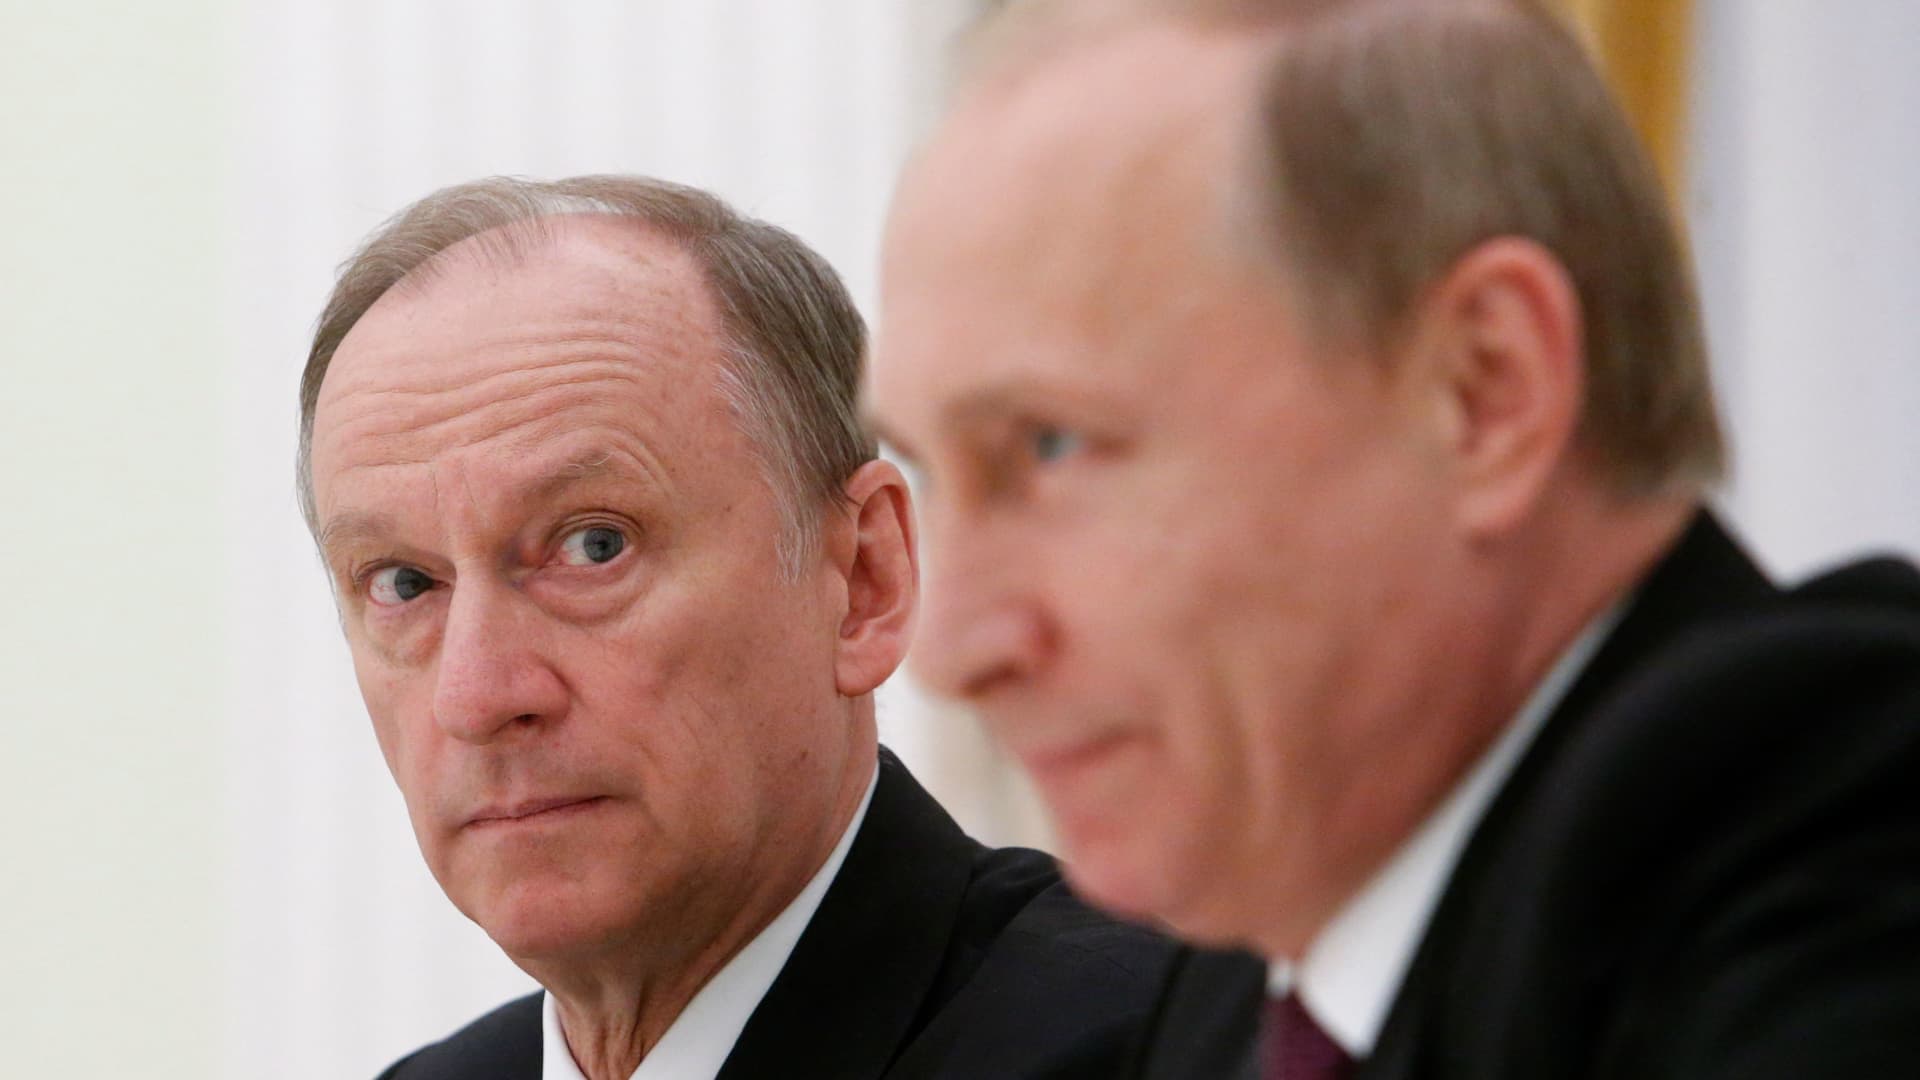 Russian Security Council Secretary Nikolai Patrushev (L) looks at President Vladimir Putin during a meeting with the BRICS countries' senior officials in charge of security matters at the Kremlin in Moscow on May 26, 2015.